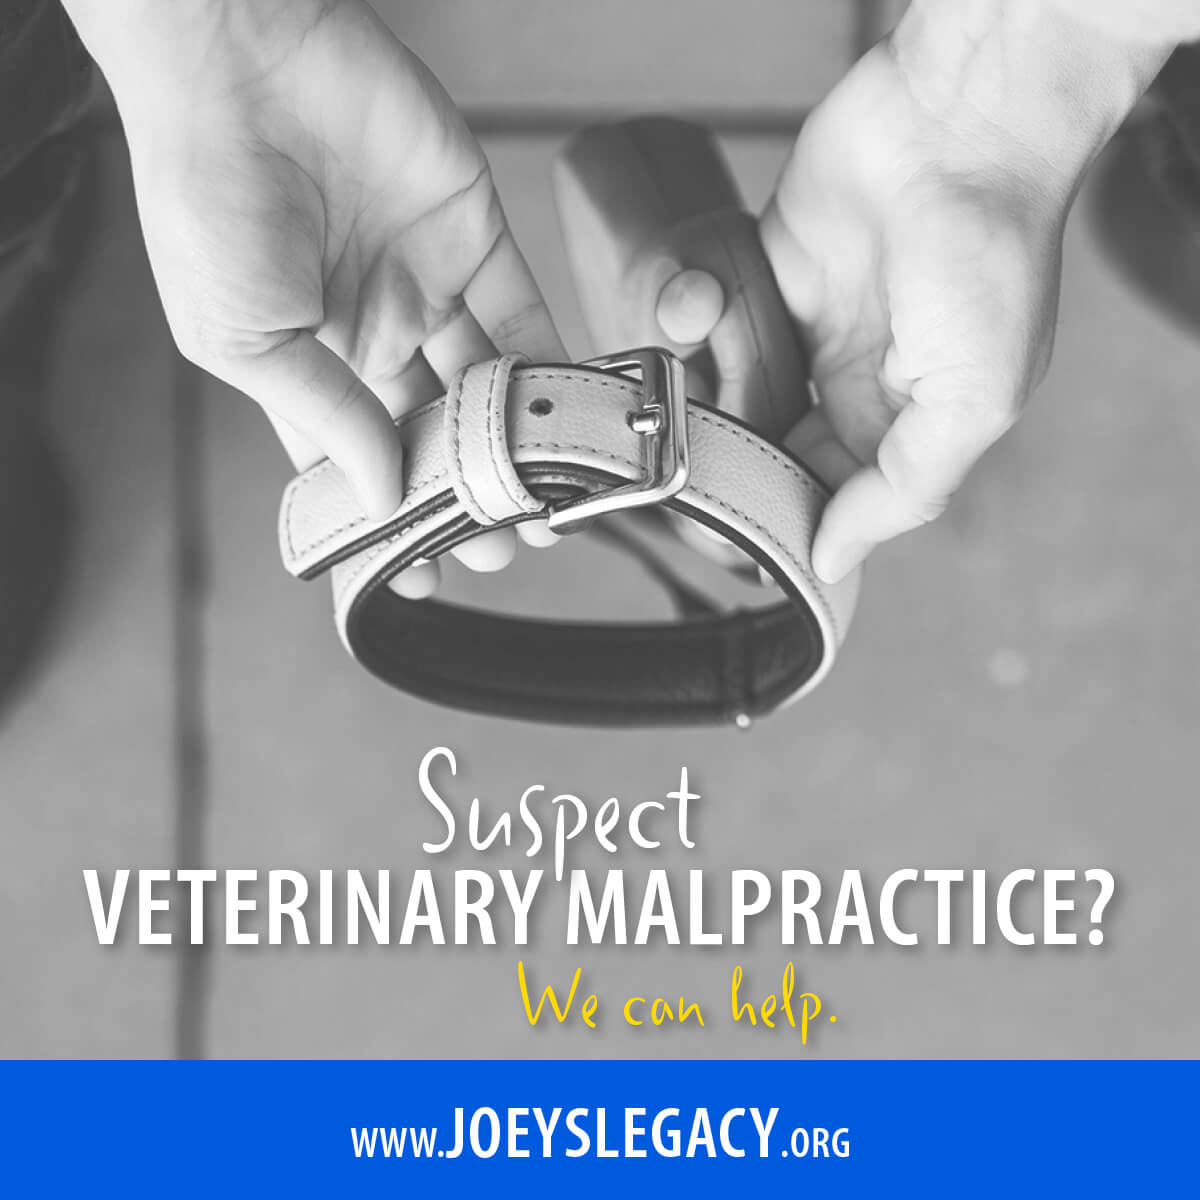 Suspect Veterinary Malpractice? Hands holding an empty collar image for social media post.